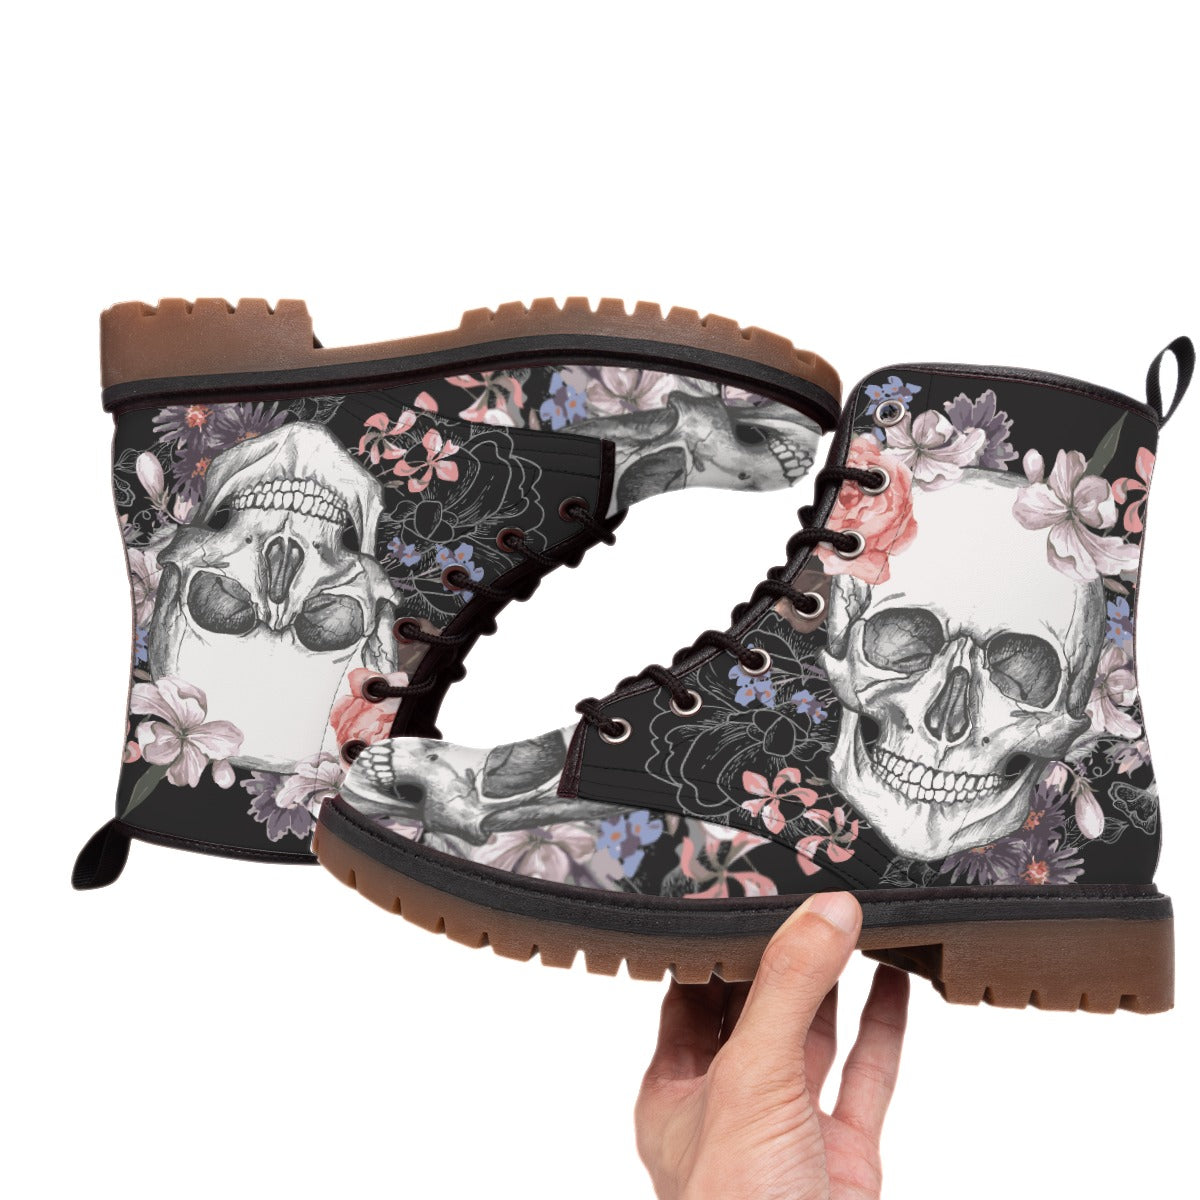 Floral skull men women Boots, Gothic skeleton halloween boots shoes Horror boots, skull shoes